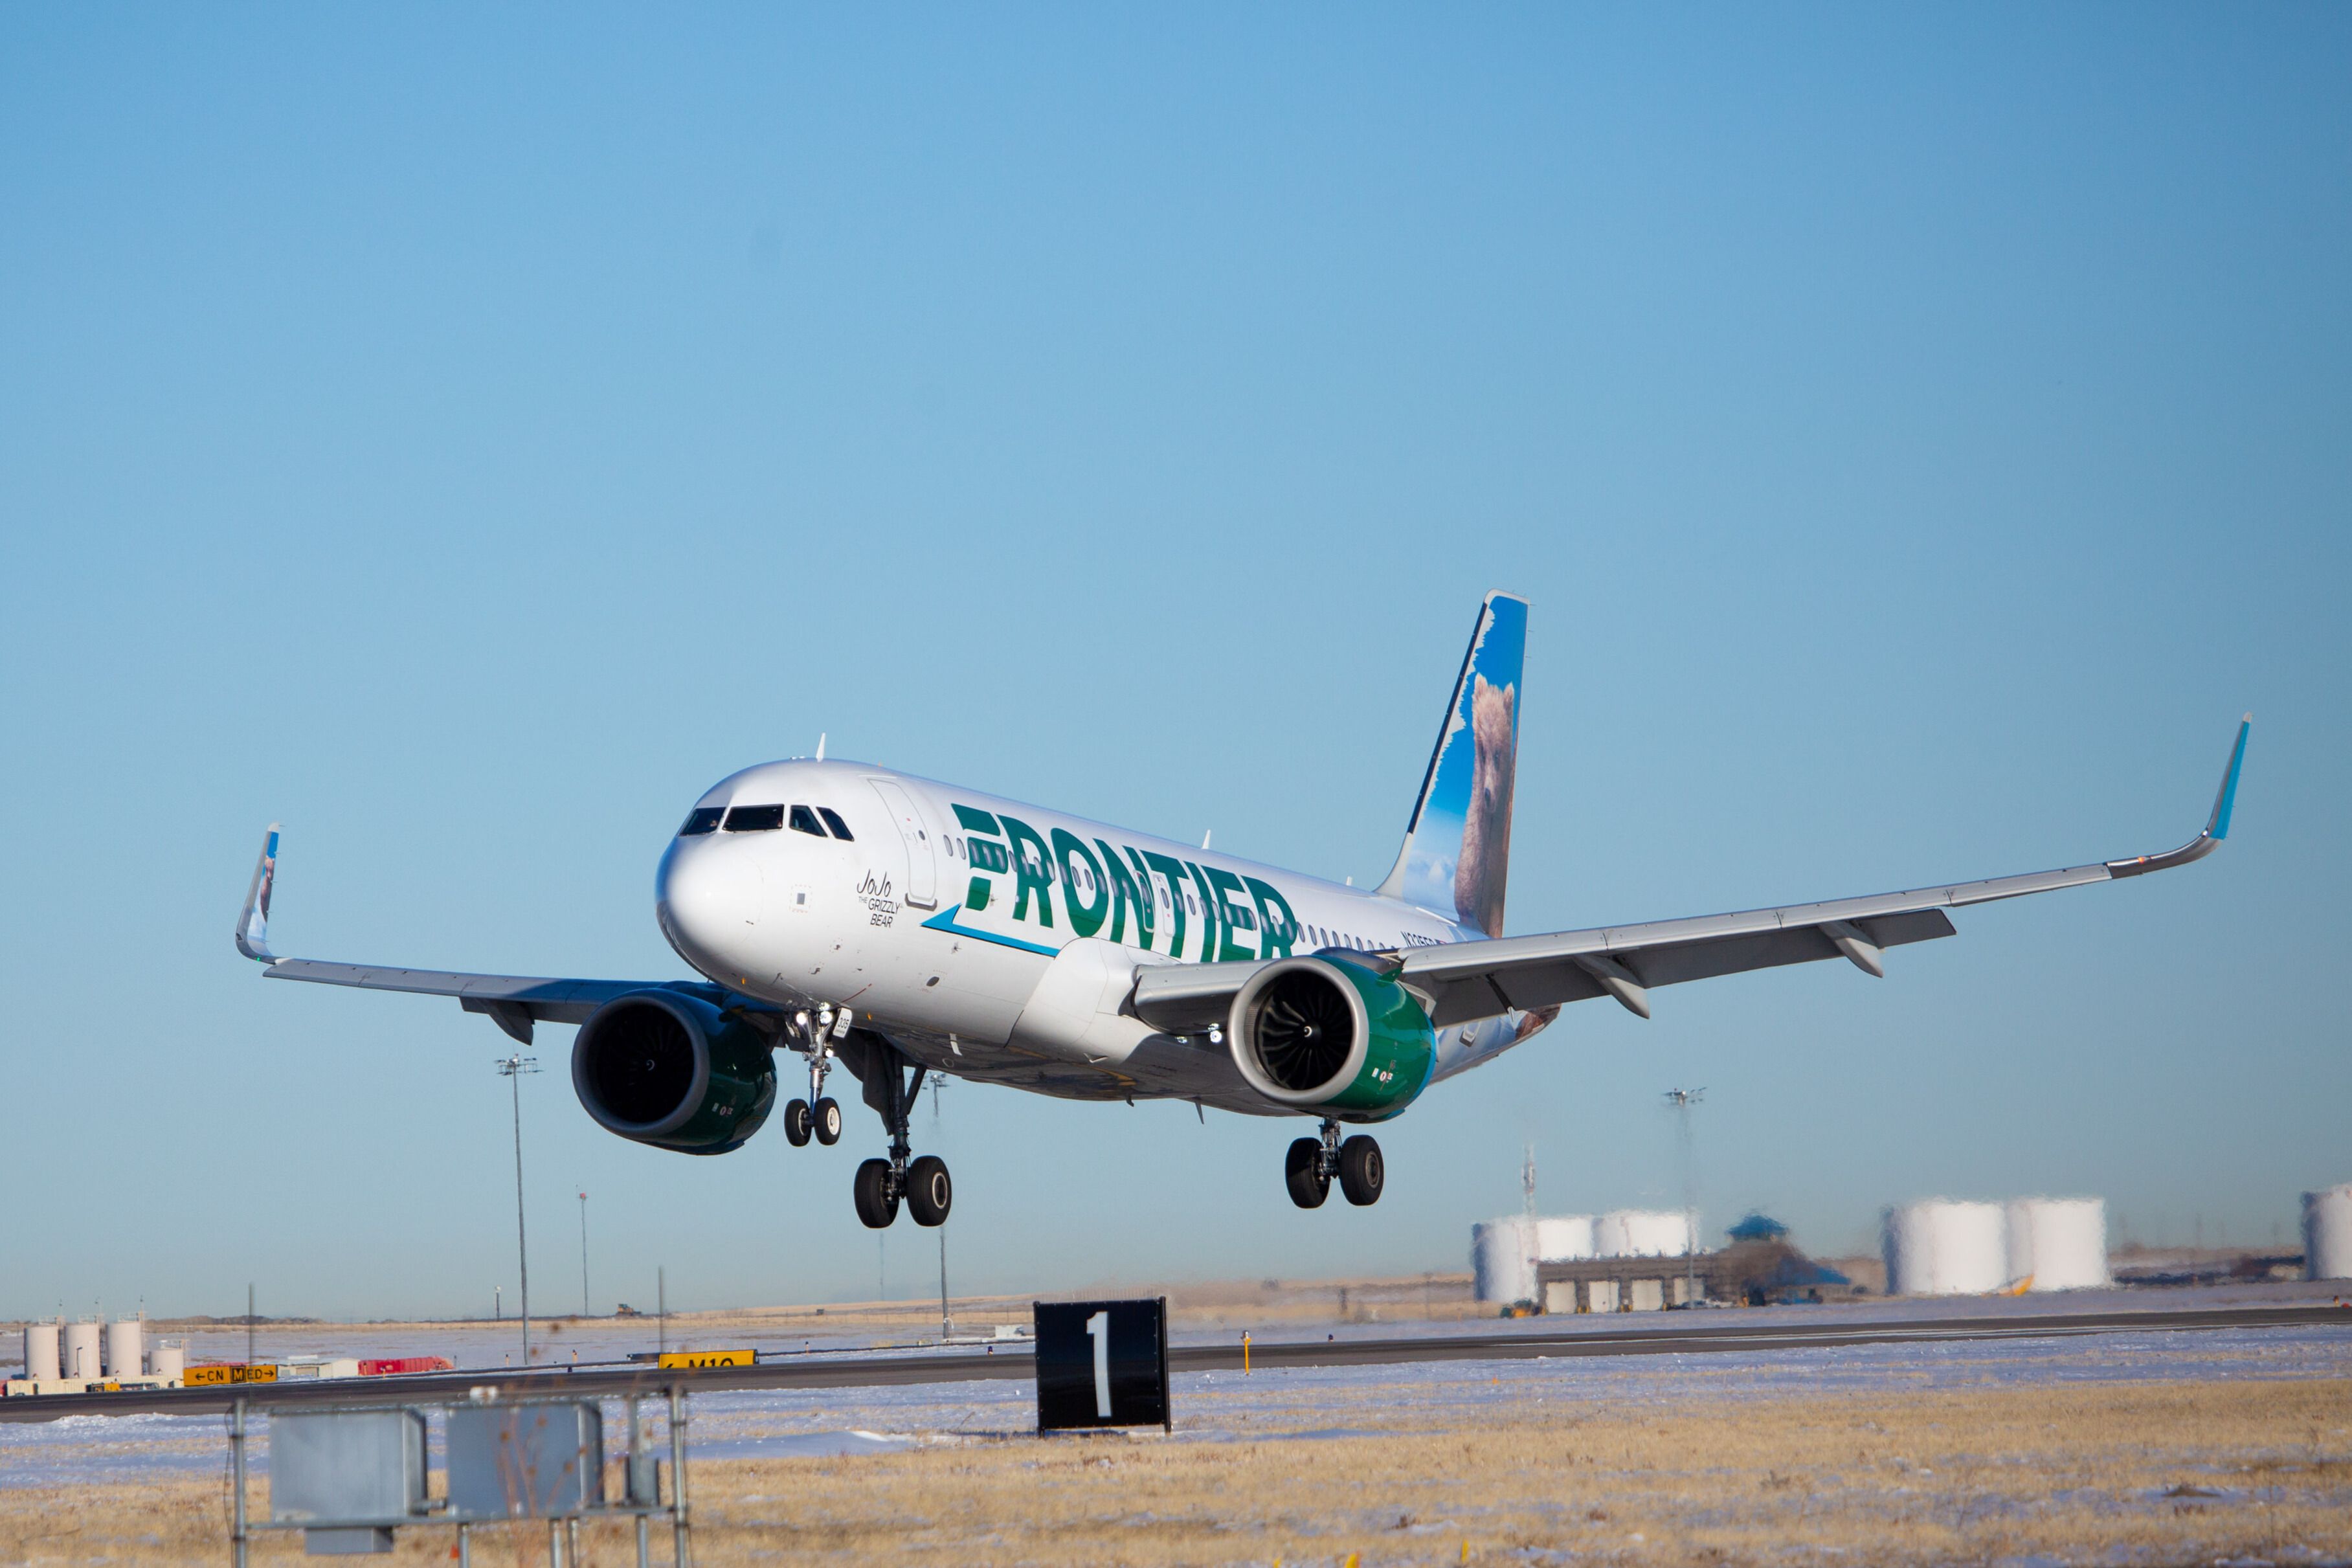 A Frontier Airlines plane about to land.